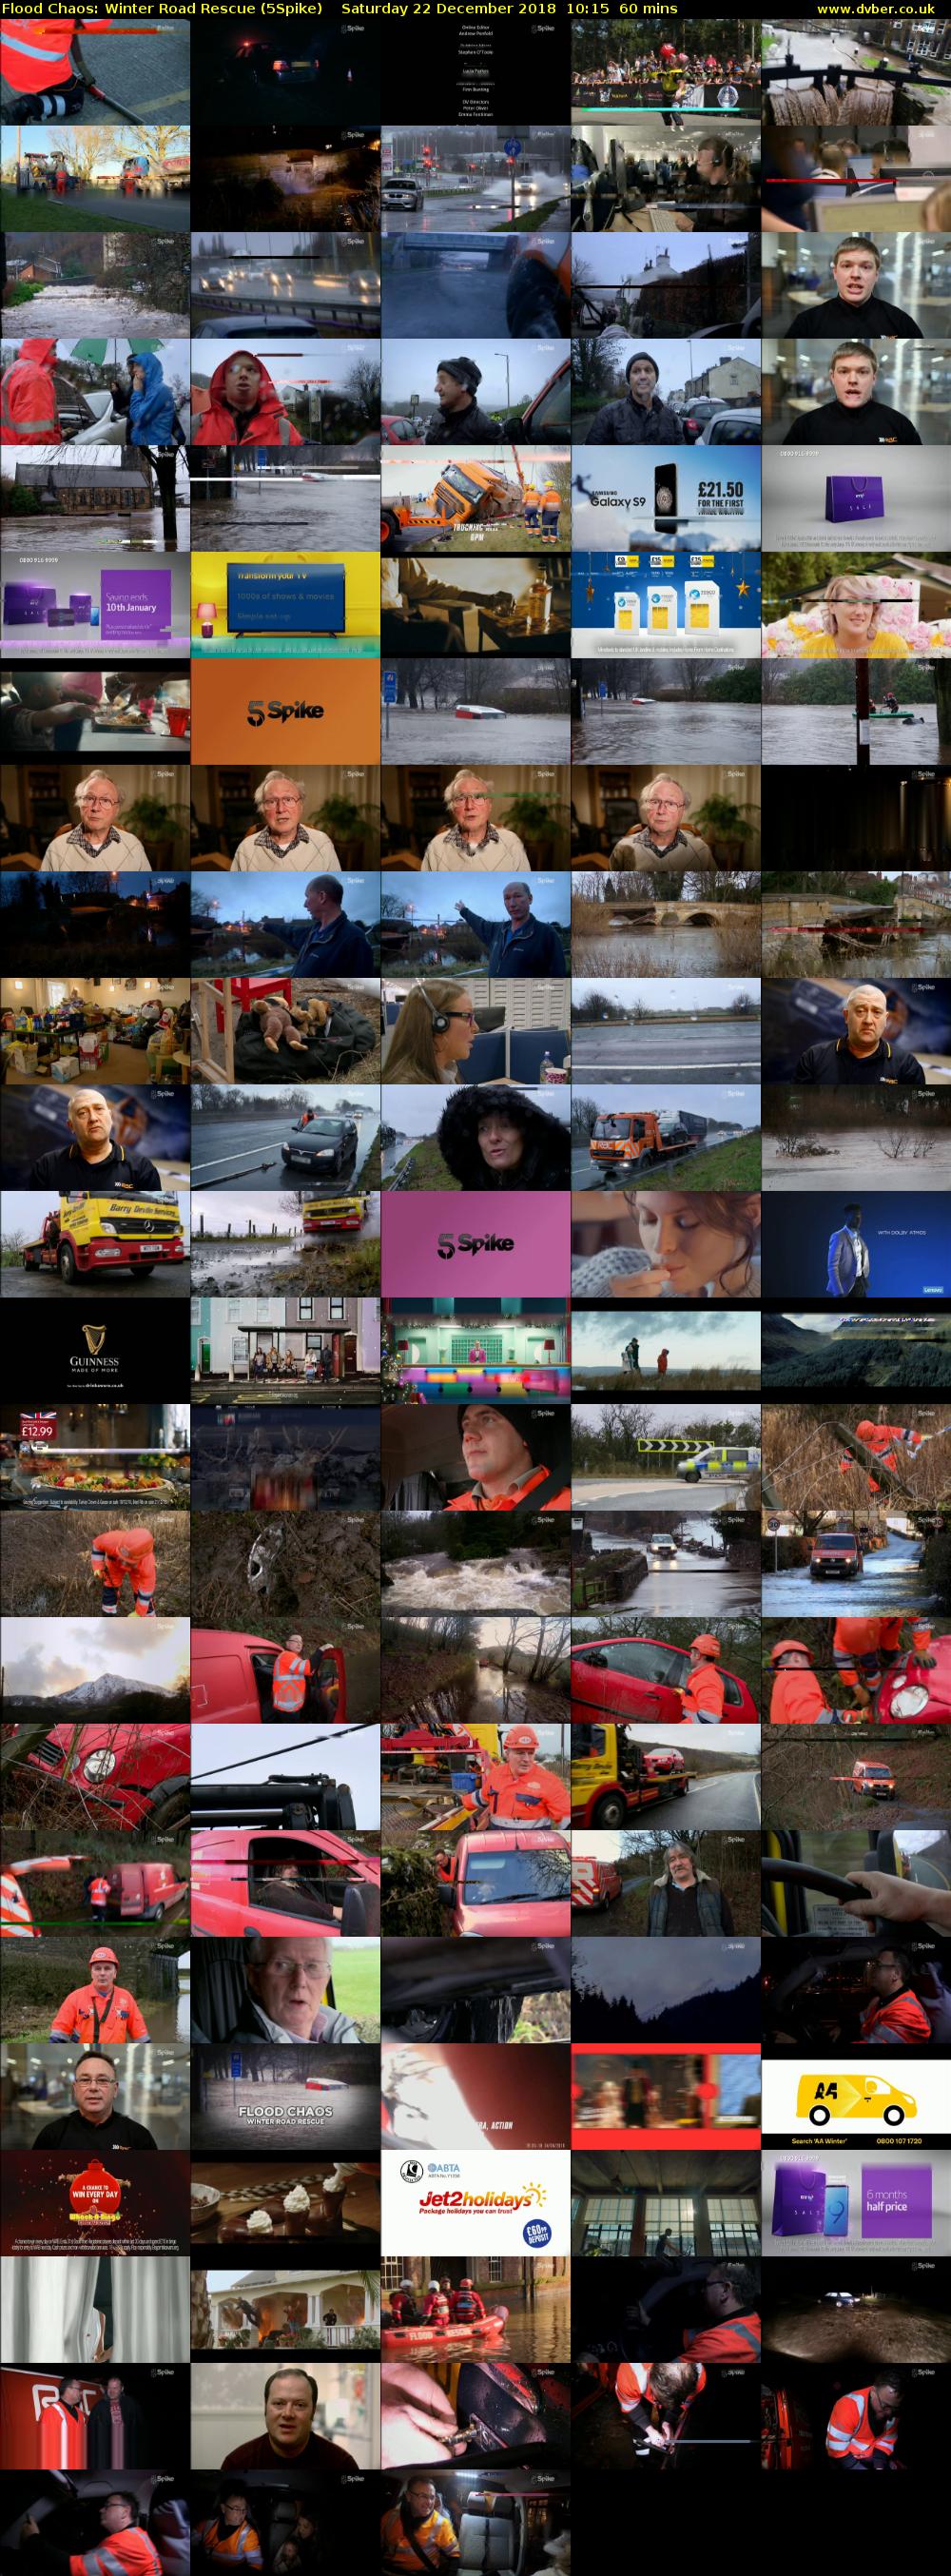 Flood Chaos: Winter Road Rescue (5Spike) Saturday 22 December 2018 10:15 - 11:15